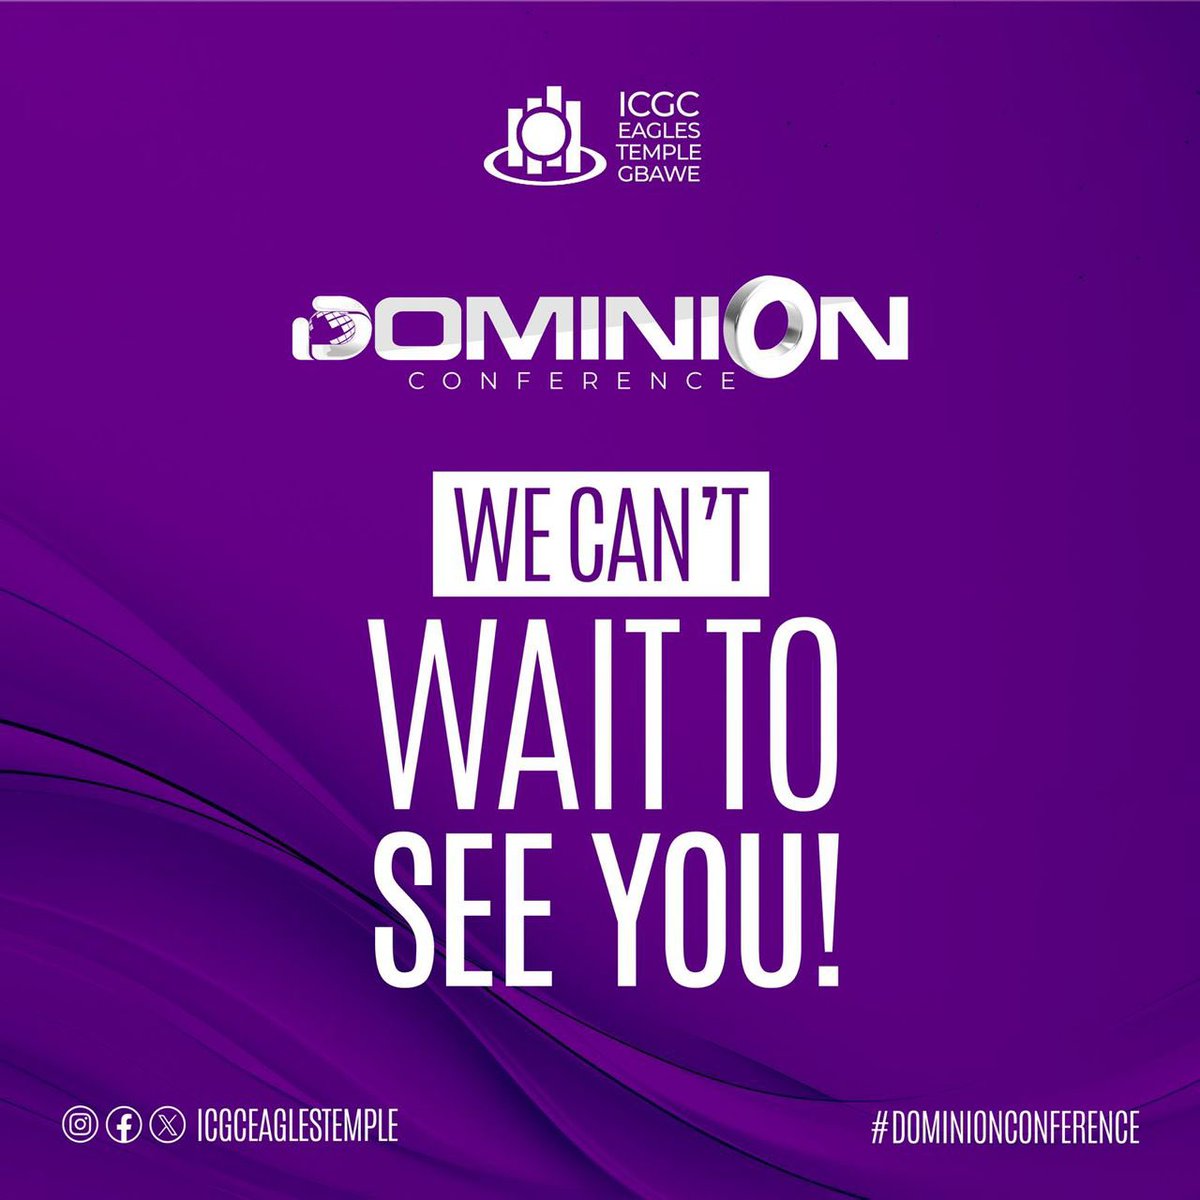 Finally the day is here! #DominionConference24 begins tonight at 7pm sharp. Be there!

#LifeChanging
#PowerPacked
#ICGCat40
#ETGodyear2024 #WeAreICGC